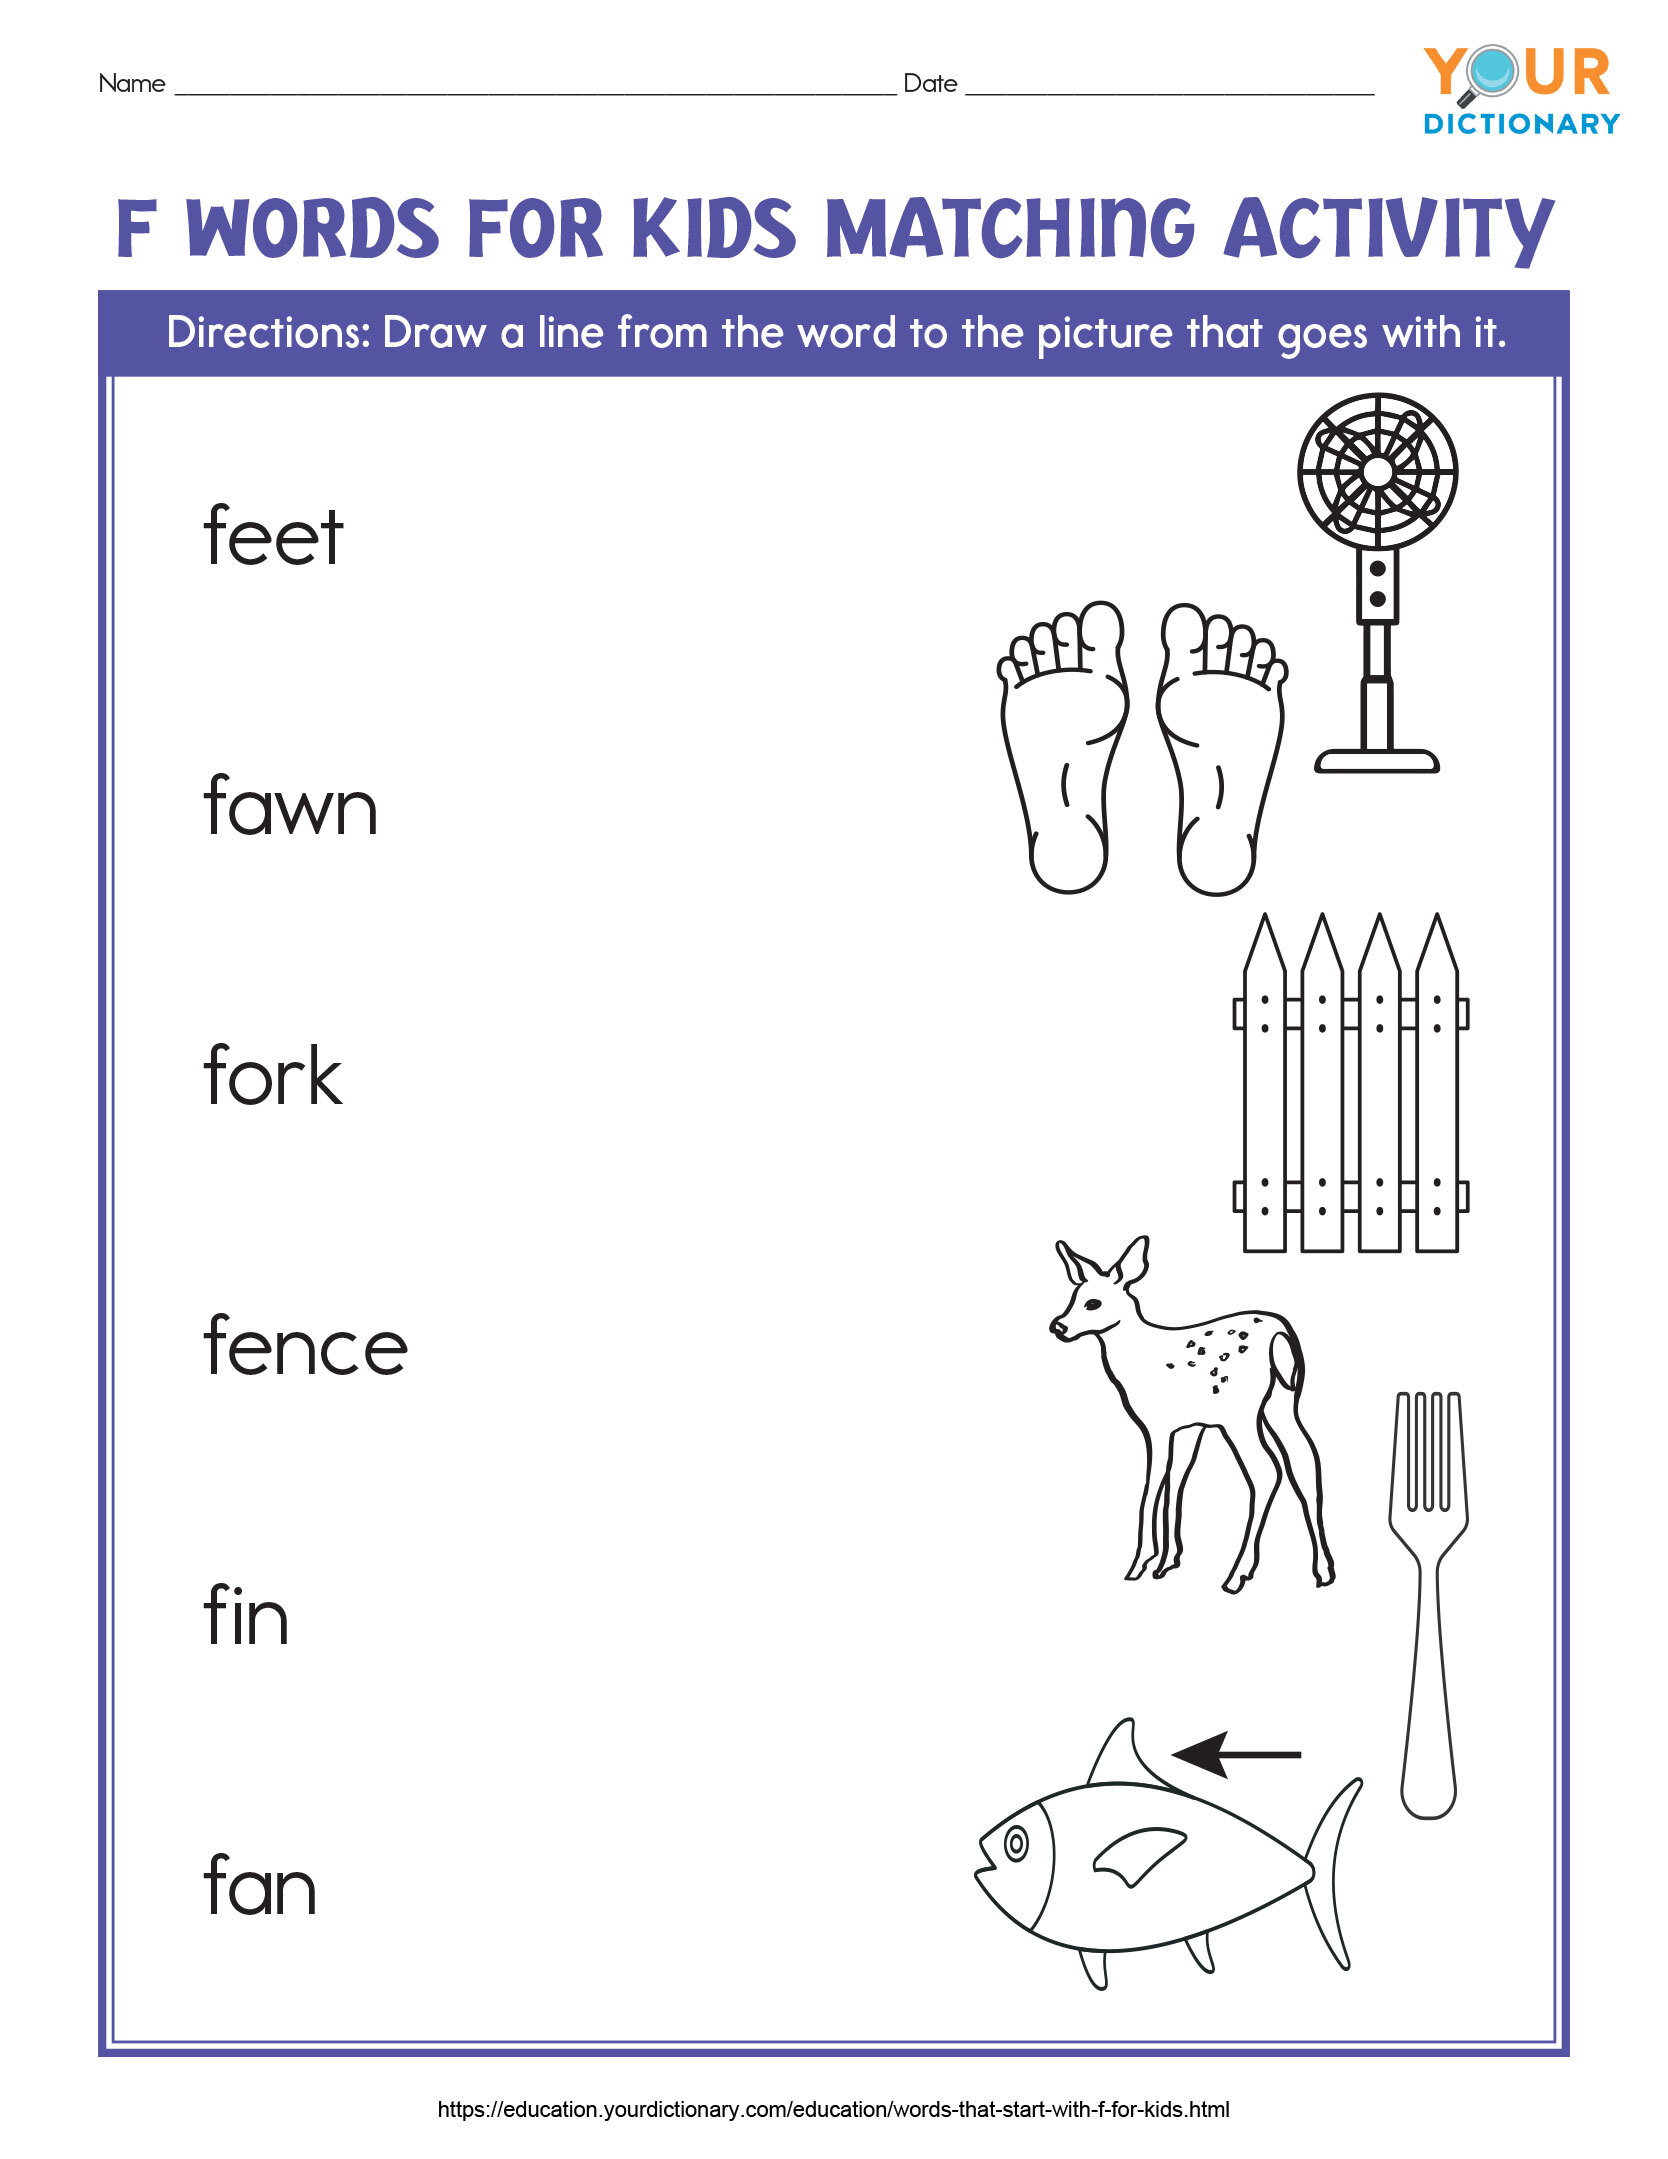 f words for kids matching activity